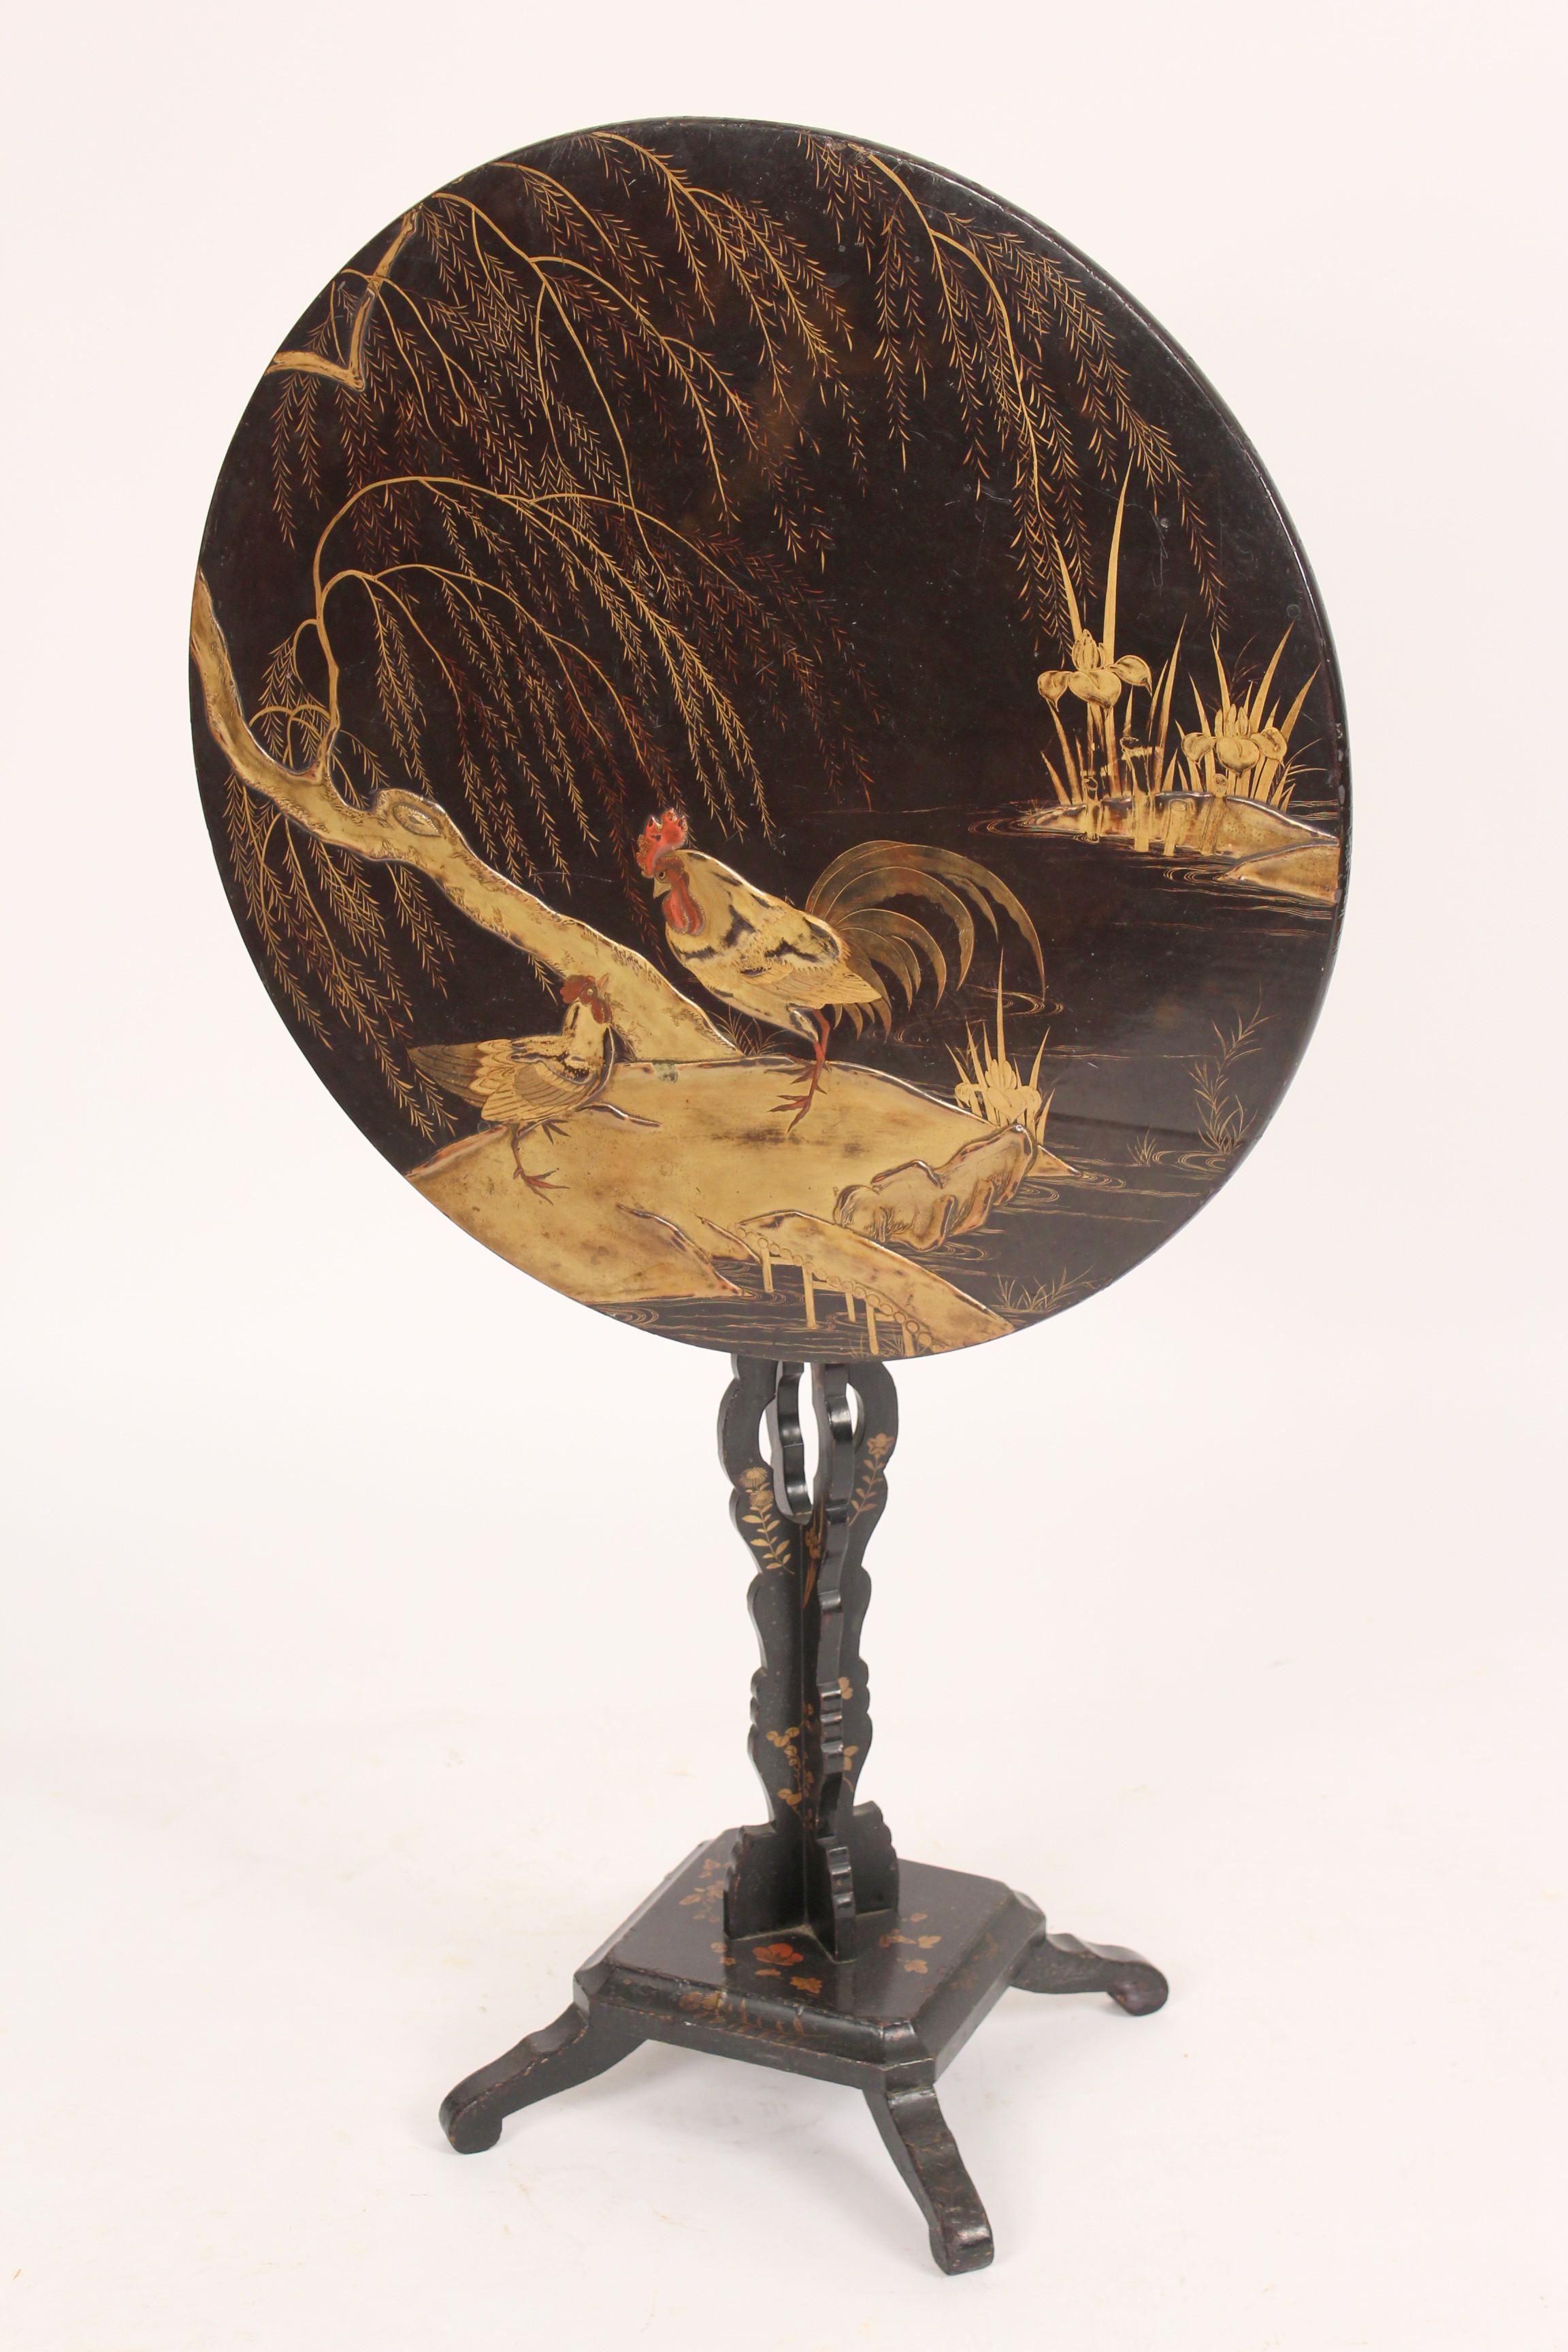 Chinese Export Chinoiserie Decorated Tilt Top Table